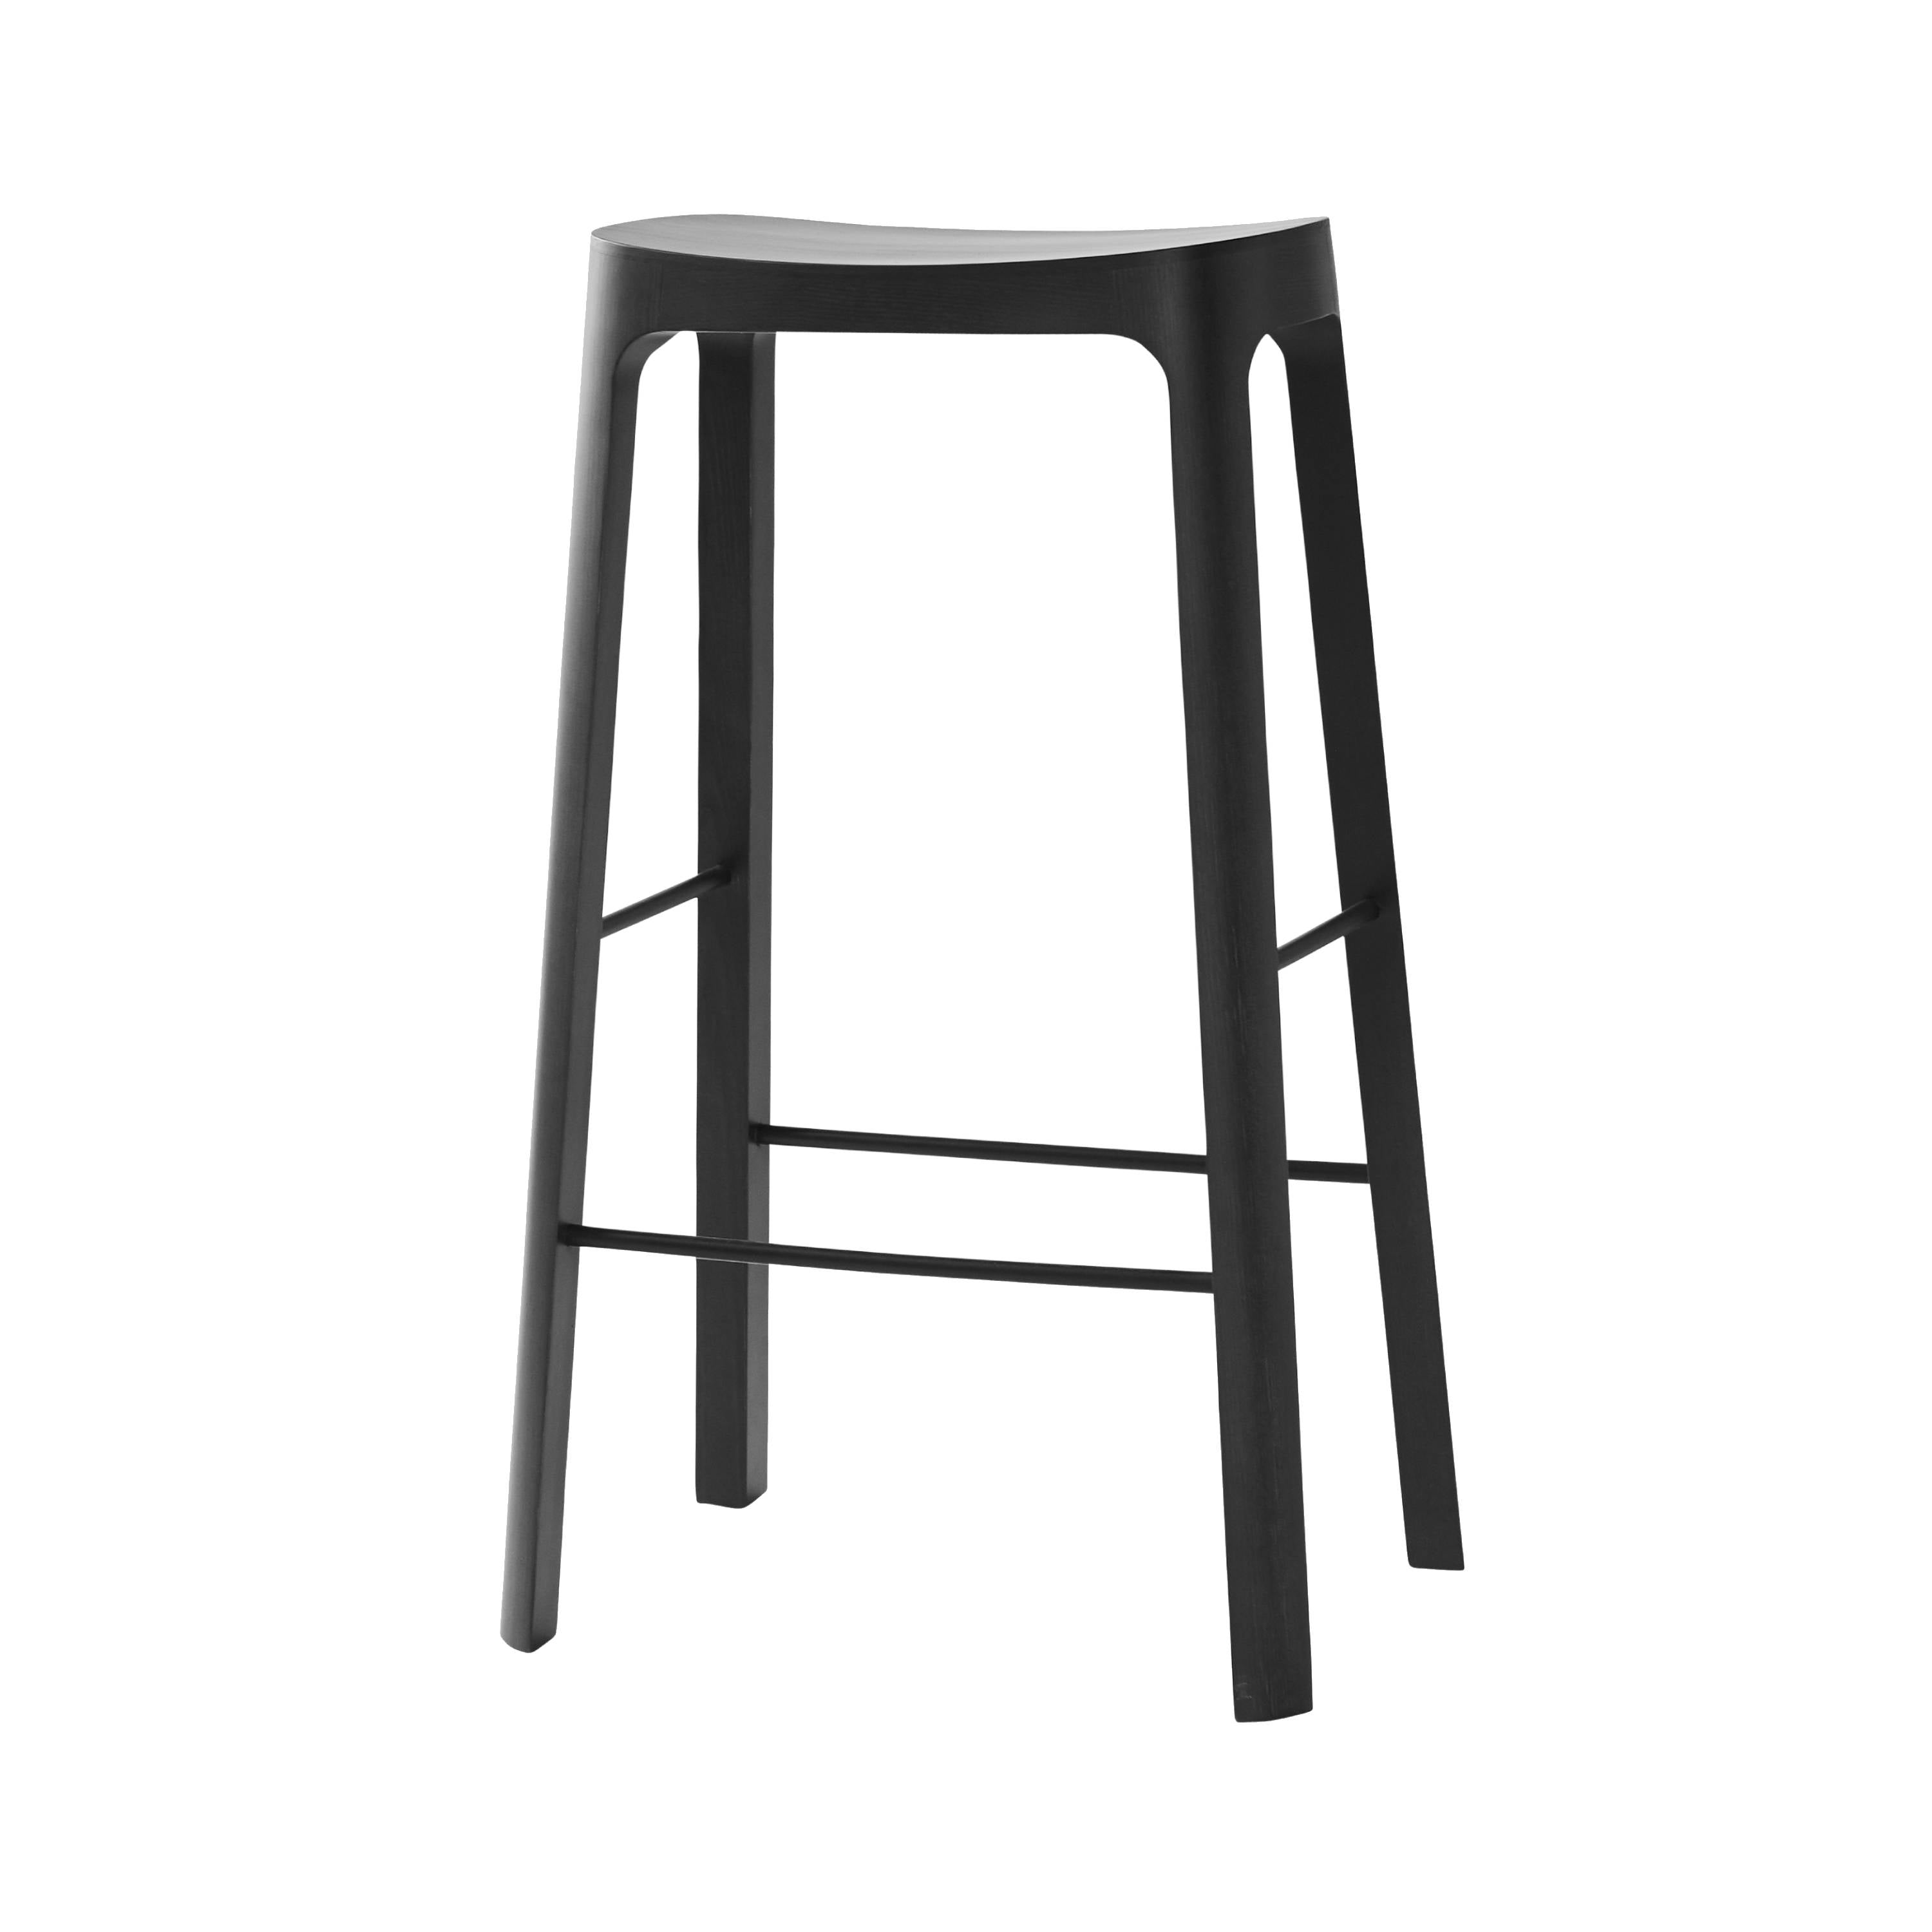 Crofton Bar + Counter Stool: Bar + Stained Black Pine